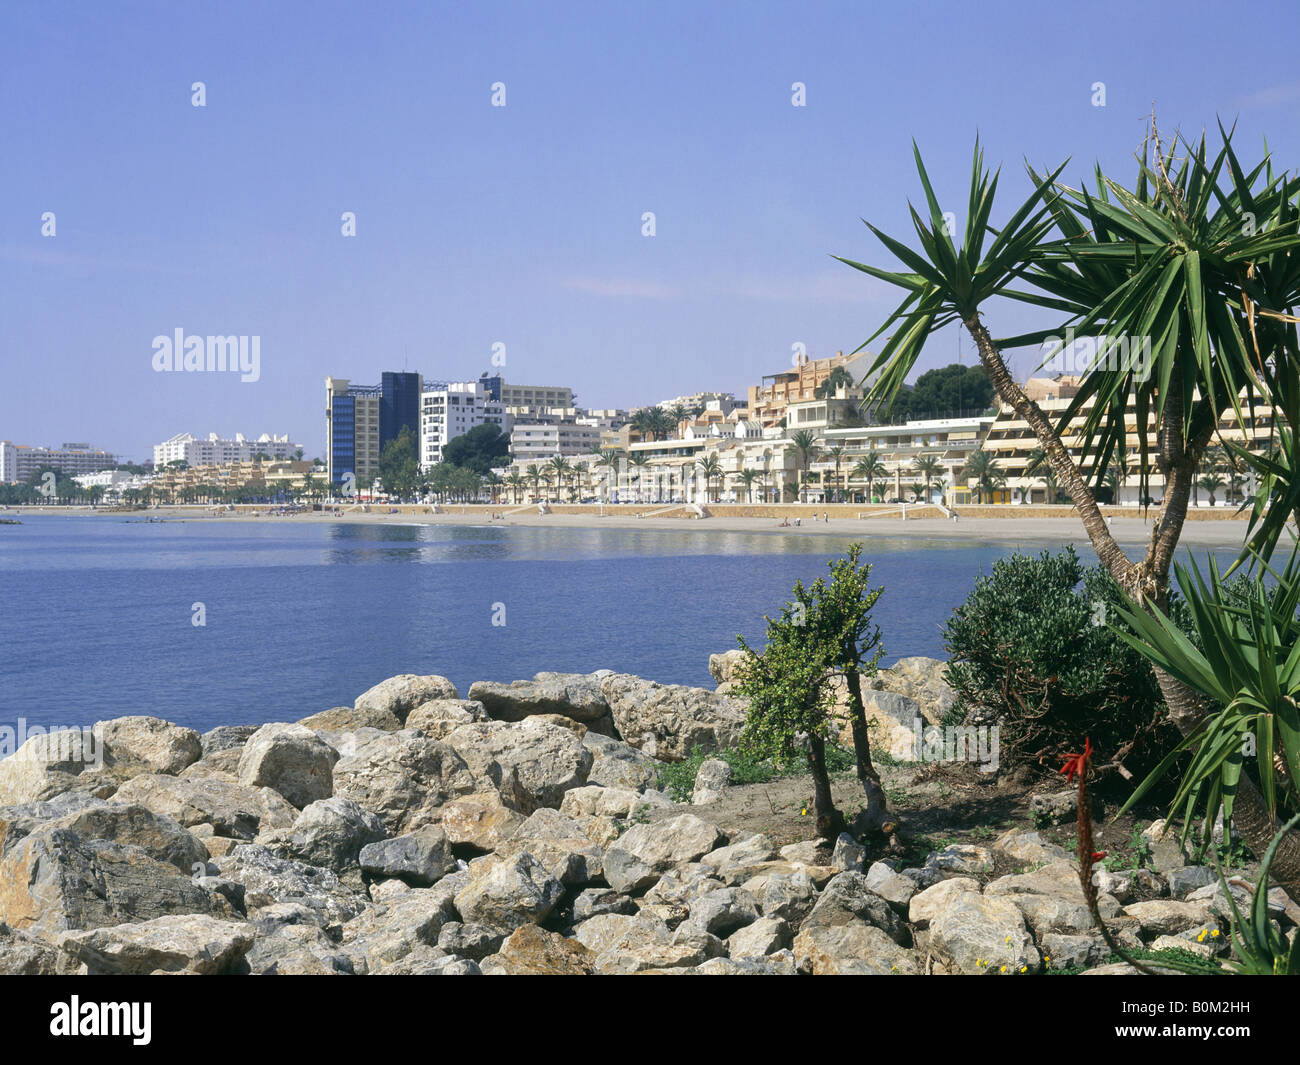 Costa Almeria. Coastal resort town. View from the port gardens of waterfront buildings. Beach. Sea. Stock Photo